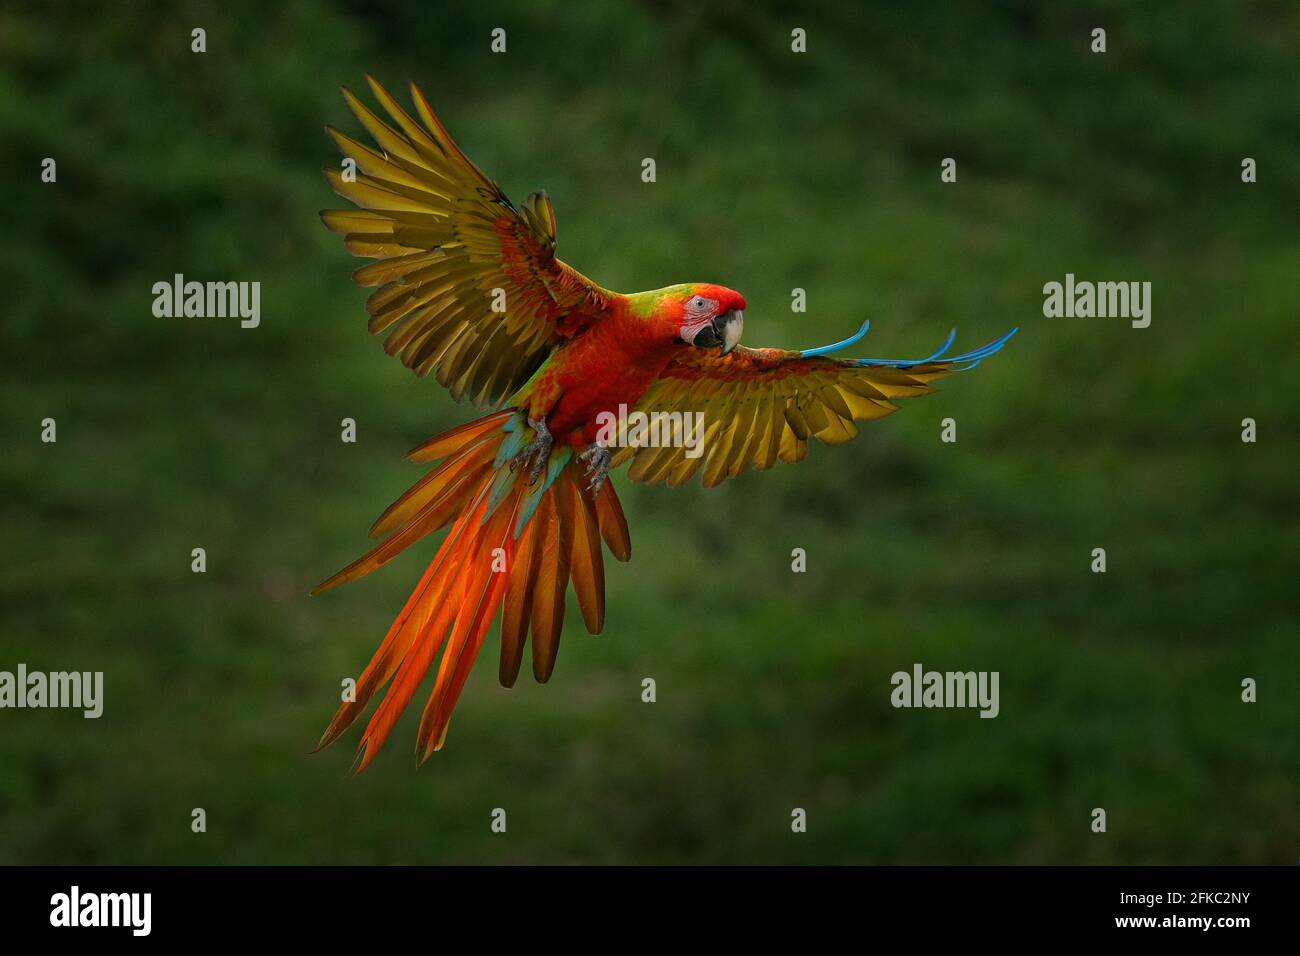 Red hybrid parrot in forest. Macaw parrot flying in dark green vegetation. Rare form Ara macao x Ara ambigua, in tropical forest, Costa Rica. Wildlife Stock Photo